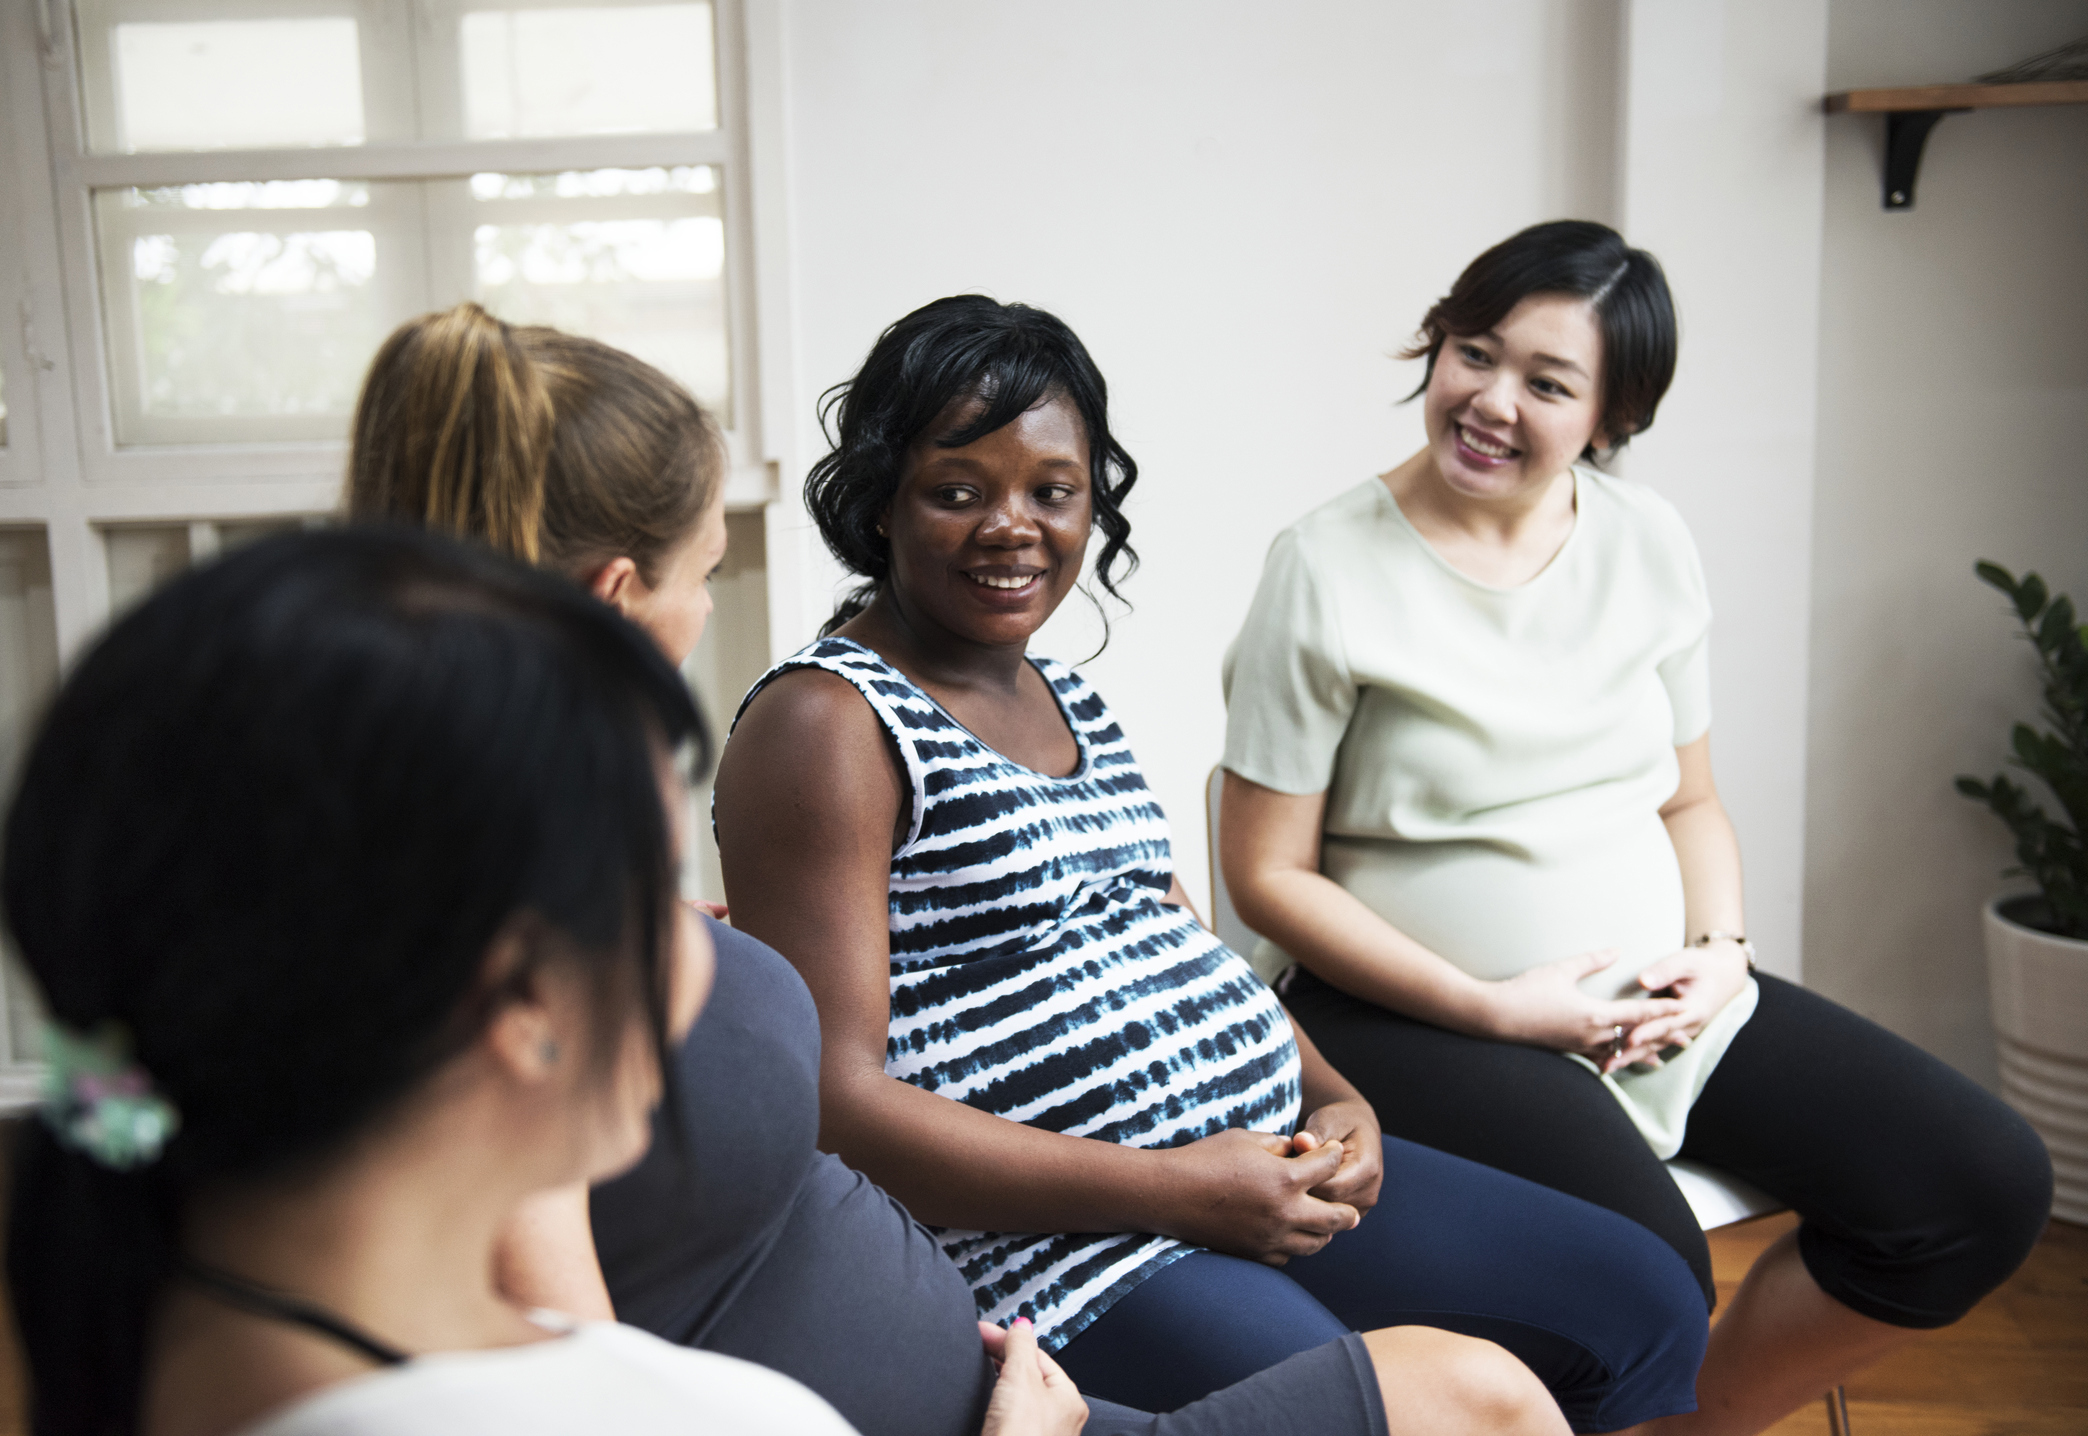 Image of  pregnant woman at a class.